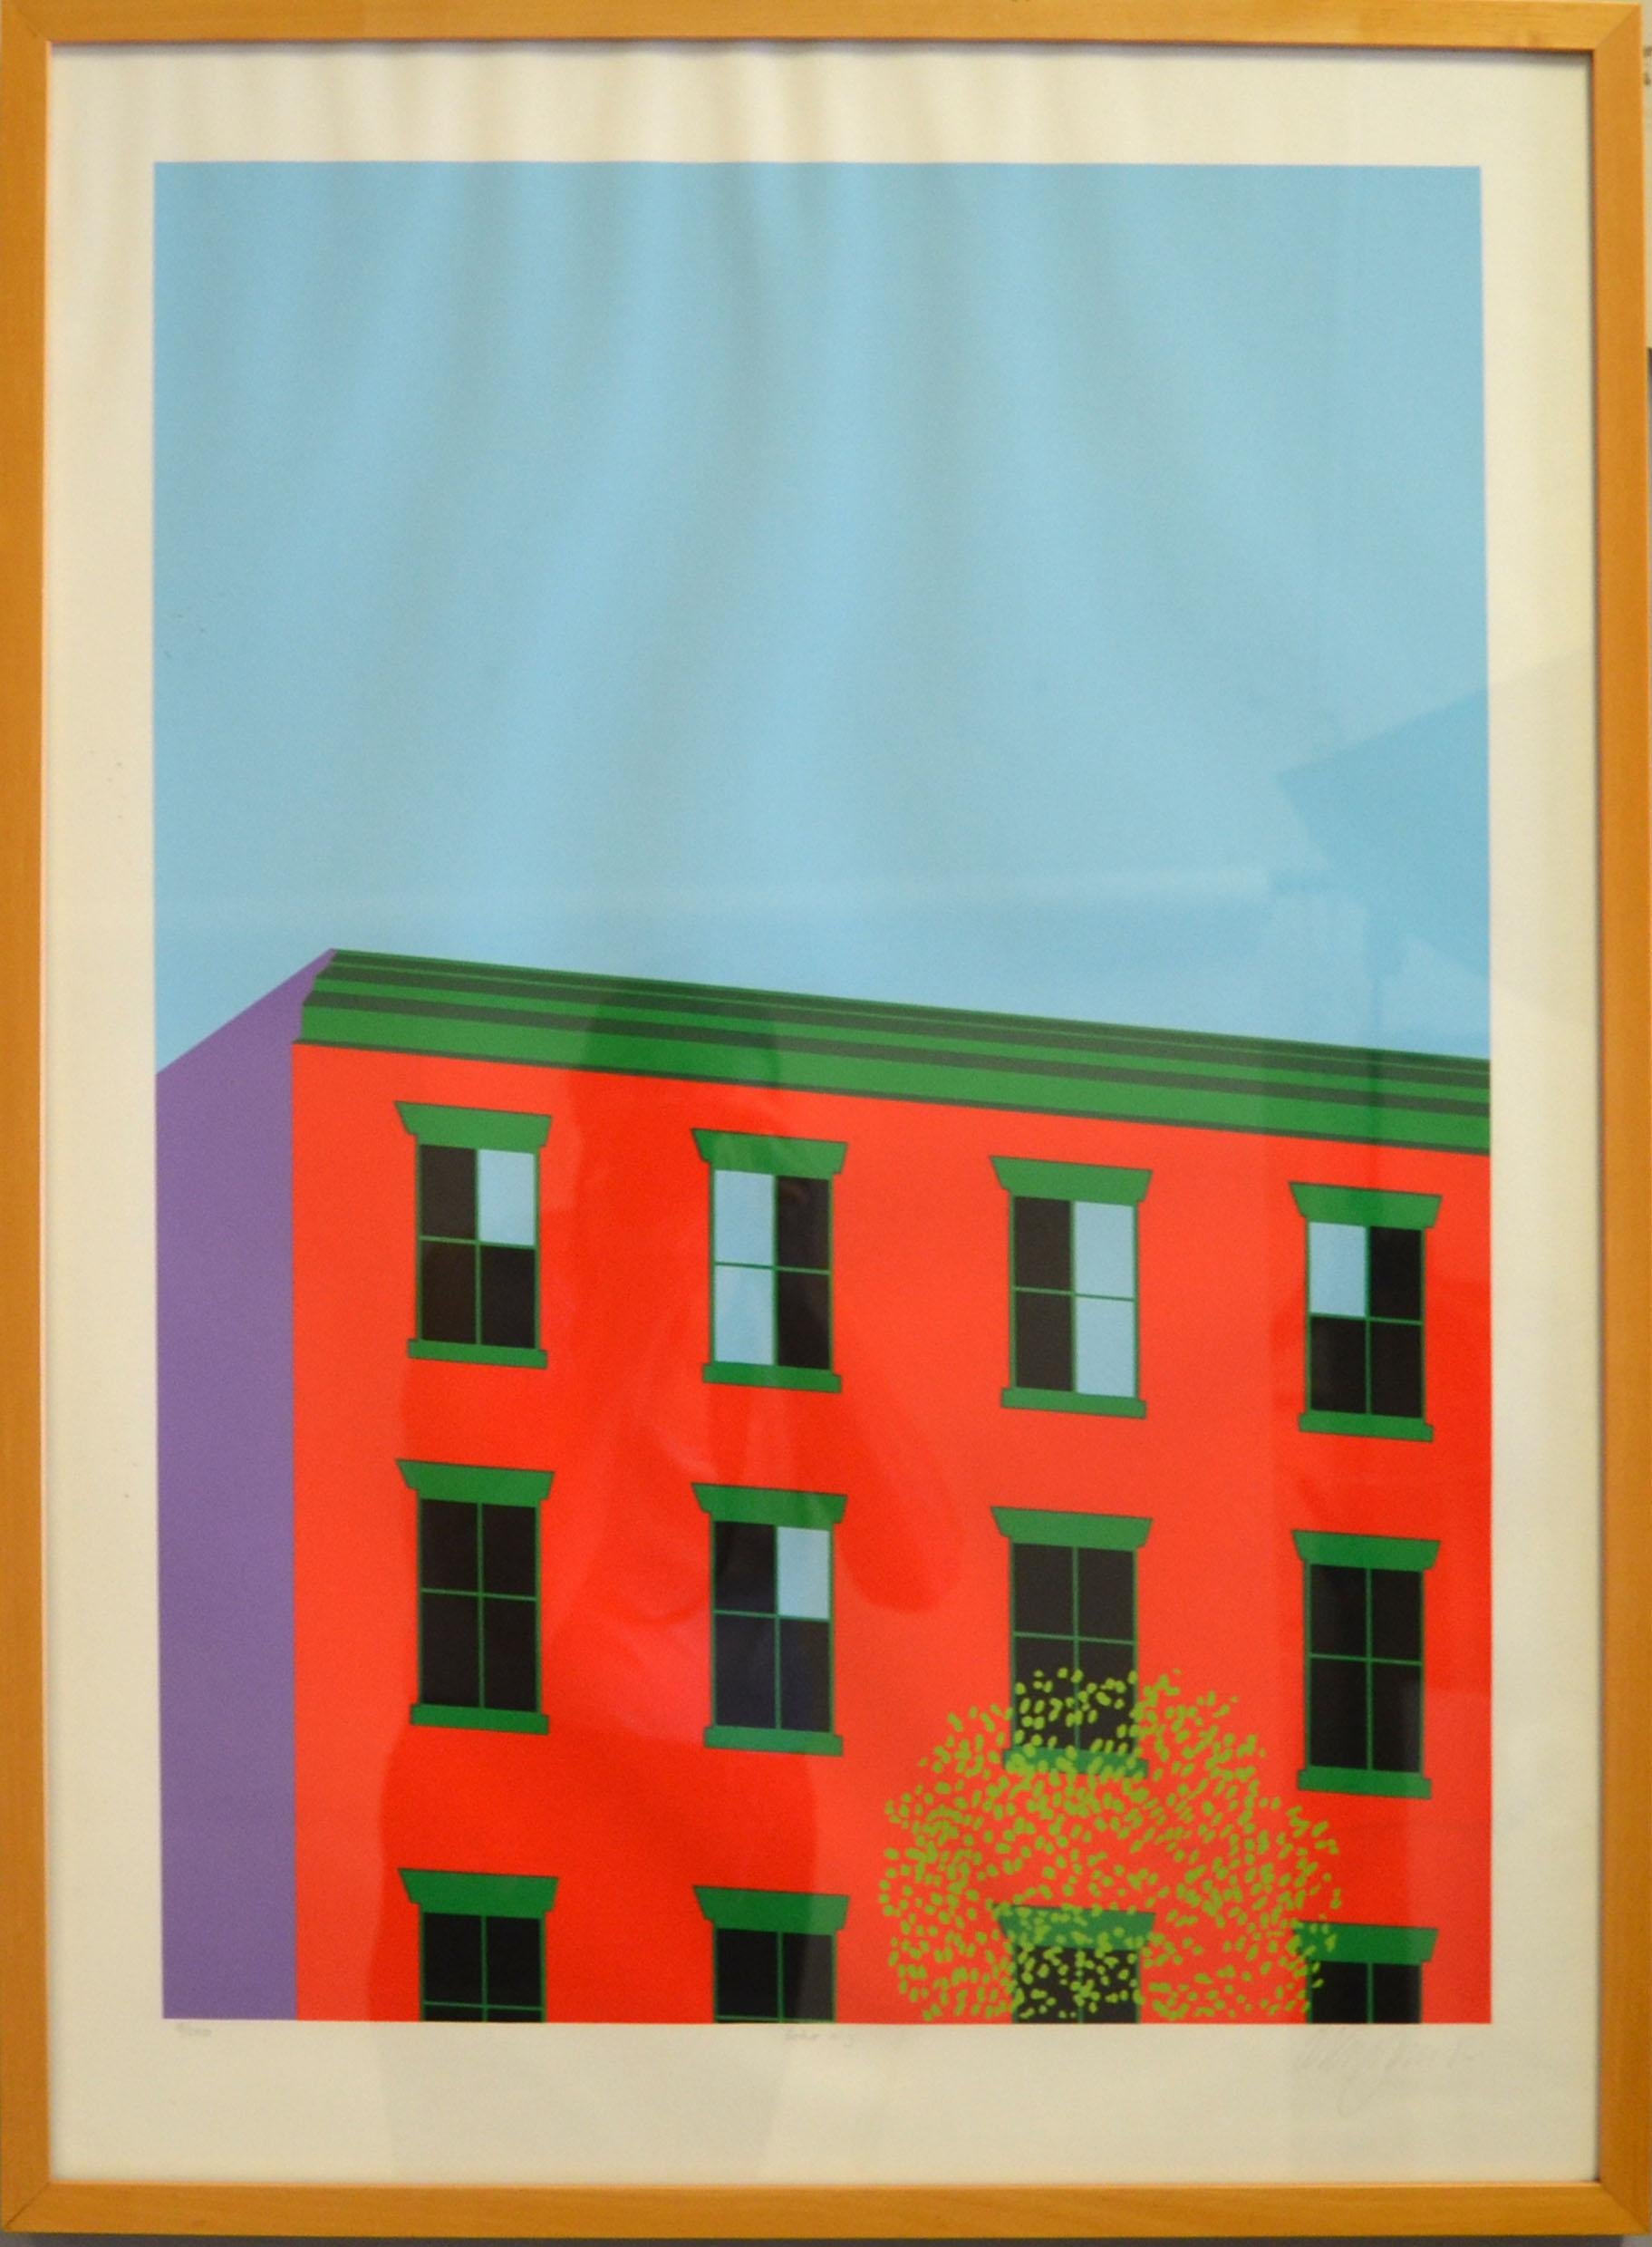 Large Wood Framed New York Soho made in 1982 Mid-Century Modern Wall Painting, Fine Art.
Signed by Artist., Numbered 19/250.
Fine Art Size: 19.75 x 27.5 inches.

 